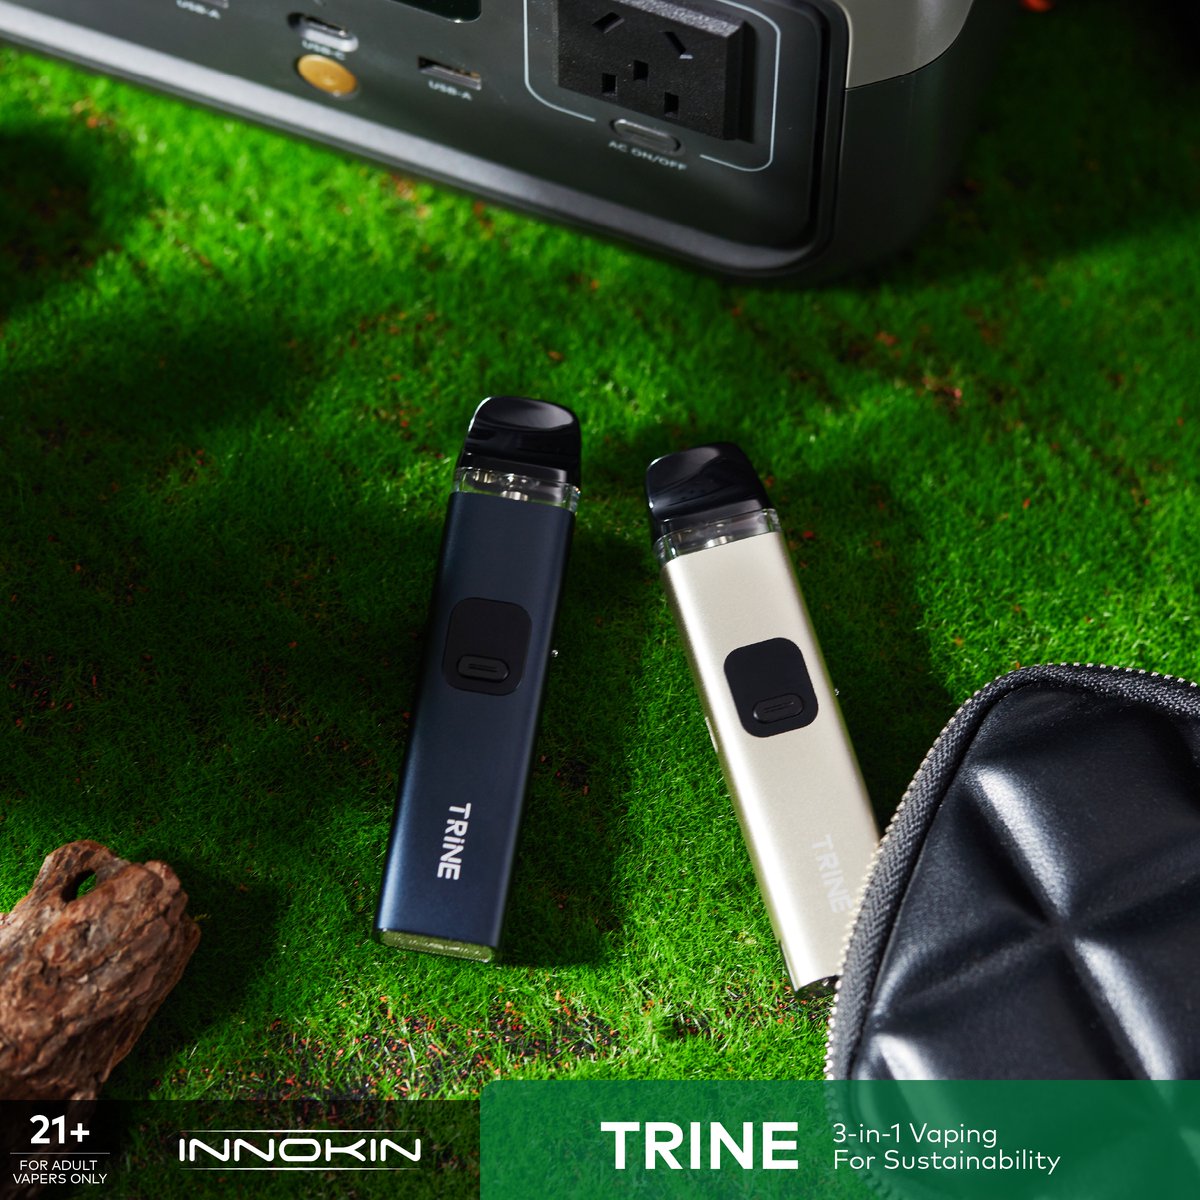 Which 𝒄𝒐𝒍𝒐𝒓 𝒄𝒐𝒎𝒃𝒐 catches your eye? Comment below👇
A. Gradient 🌈
B. Blue+Red 🔵❤️
C. Black+White ⚫⚪

18/21+ only

#Vaping #Vapelife #Innokin #TRINE #InnokinTrine #3in1vaping #GreenVaping #Sustainability